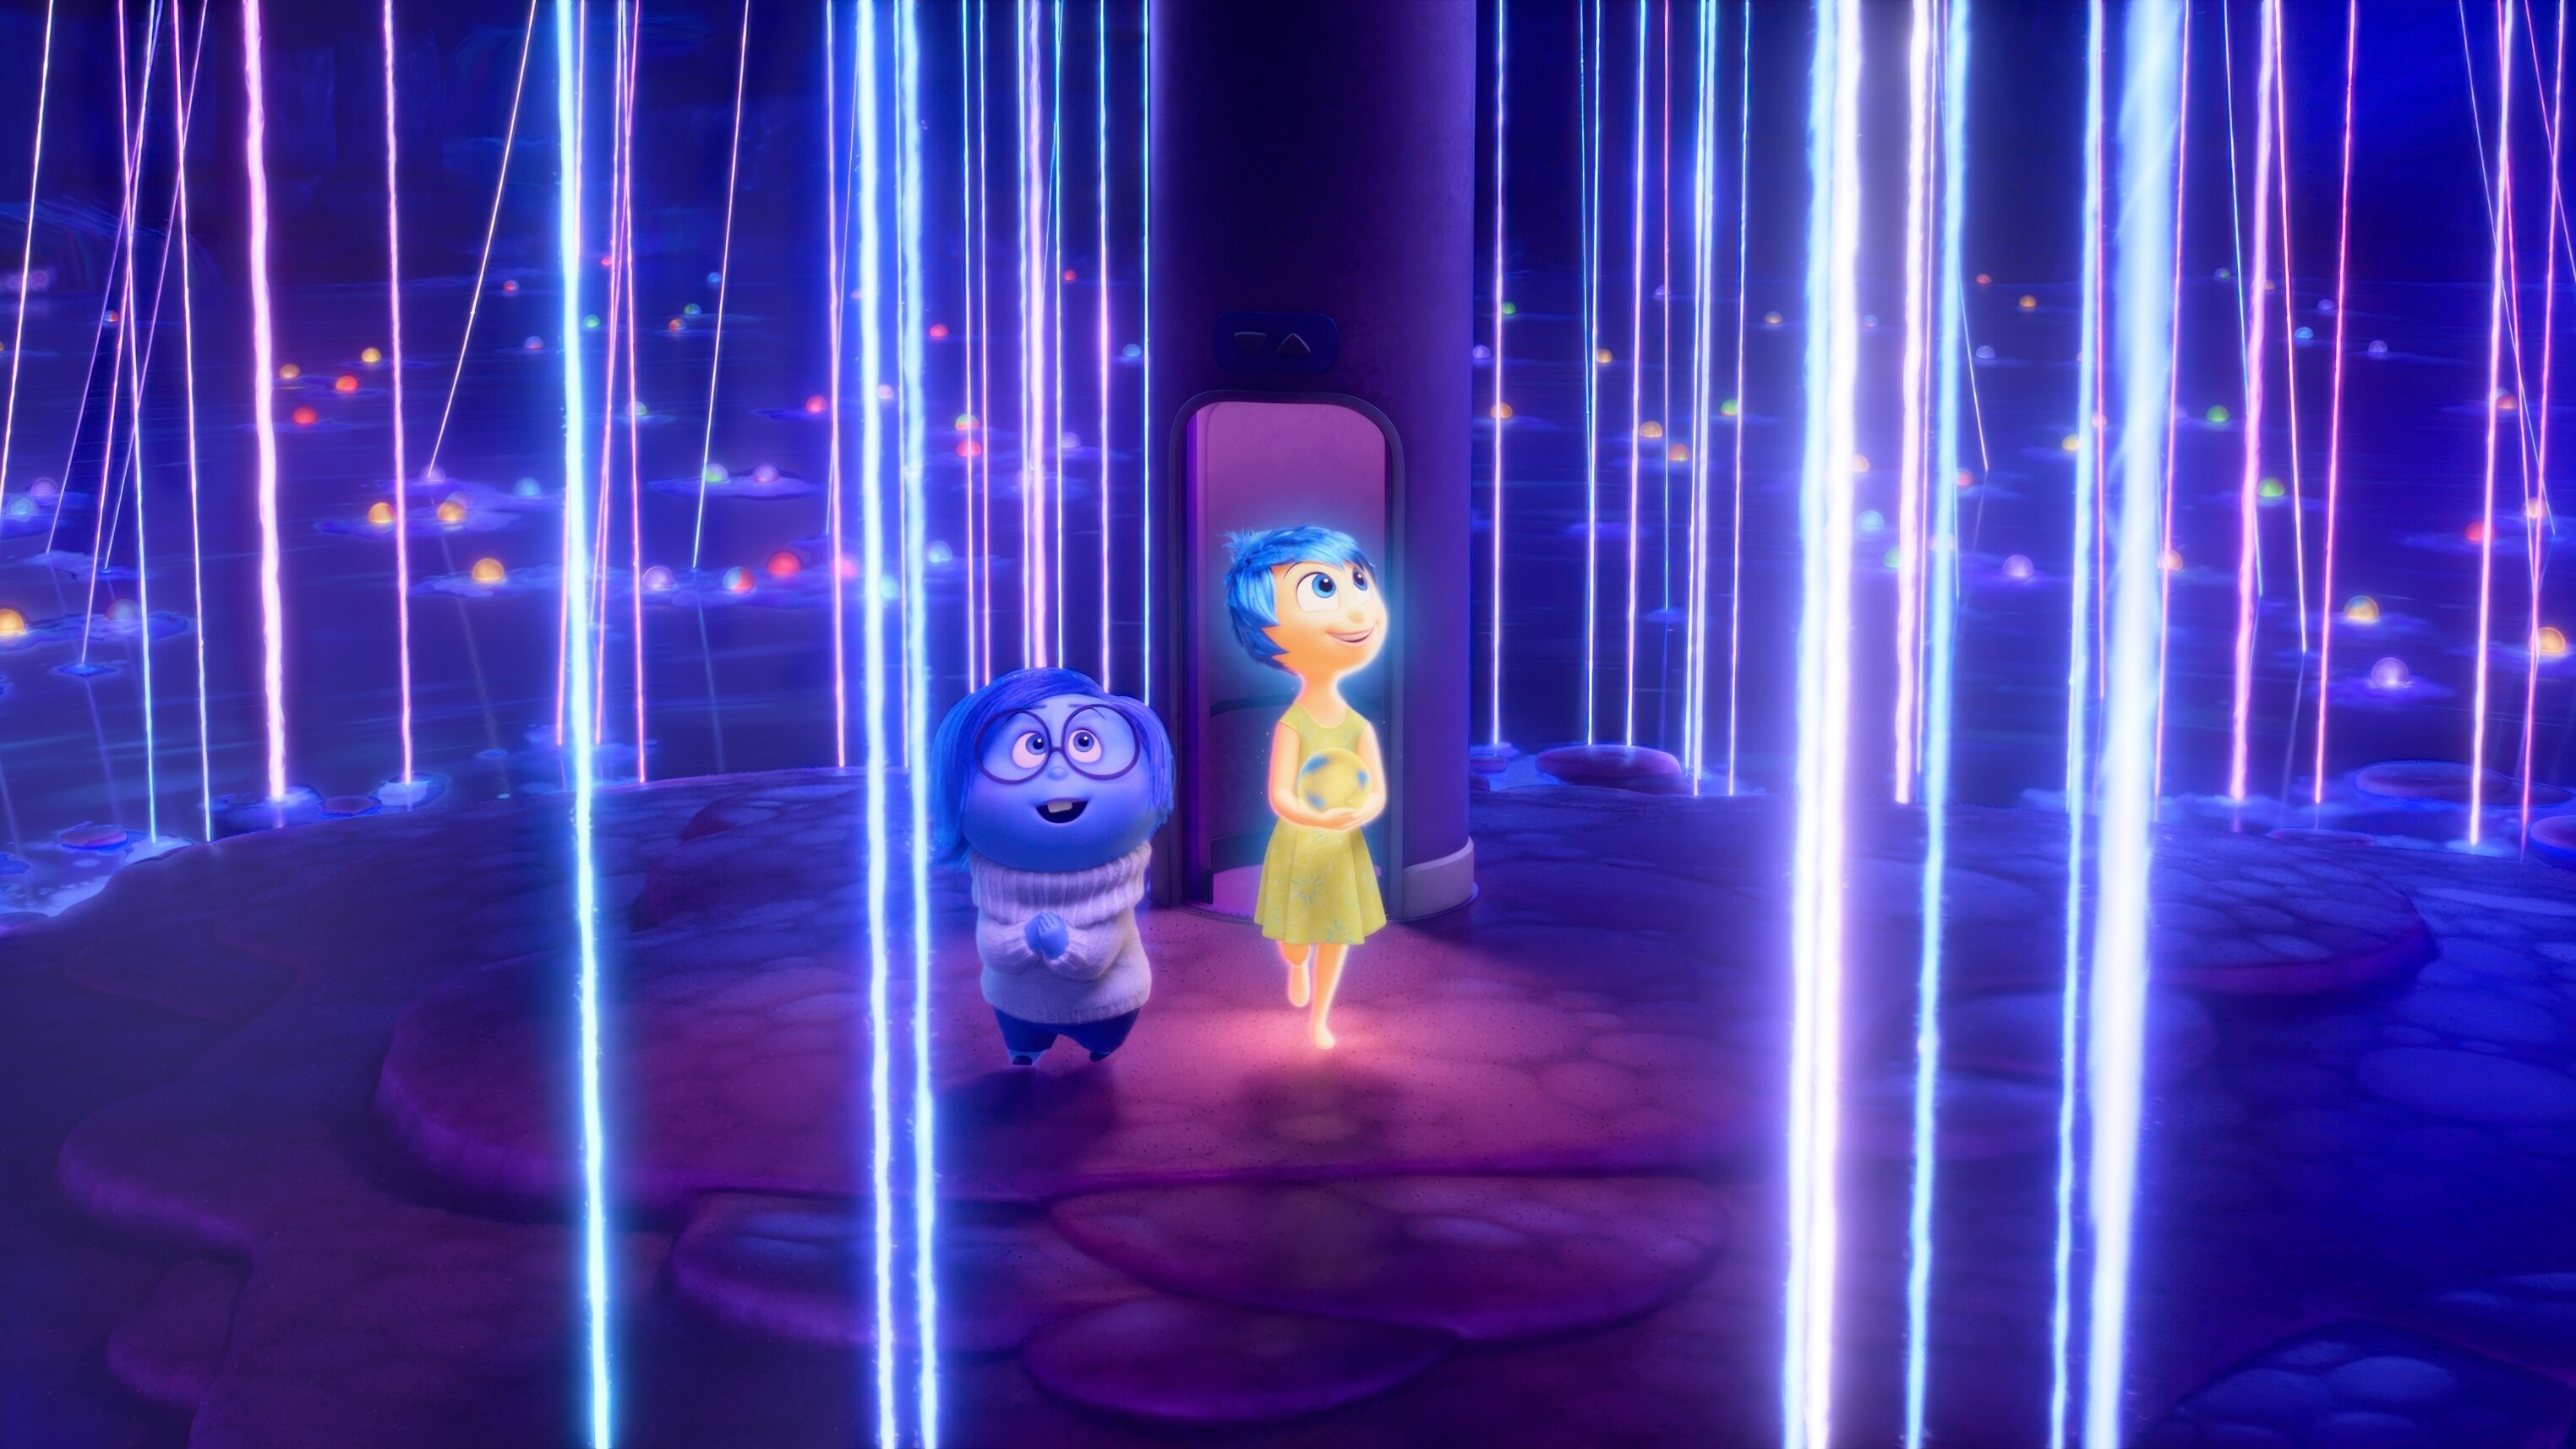 INSIDE OUT 2 BRINGS MORE JOY TO THE UK & IRELAND BOX OFFICE FOR A THIRD CONSECUTIVE WEEK